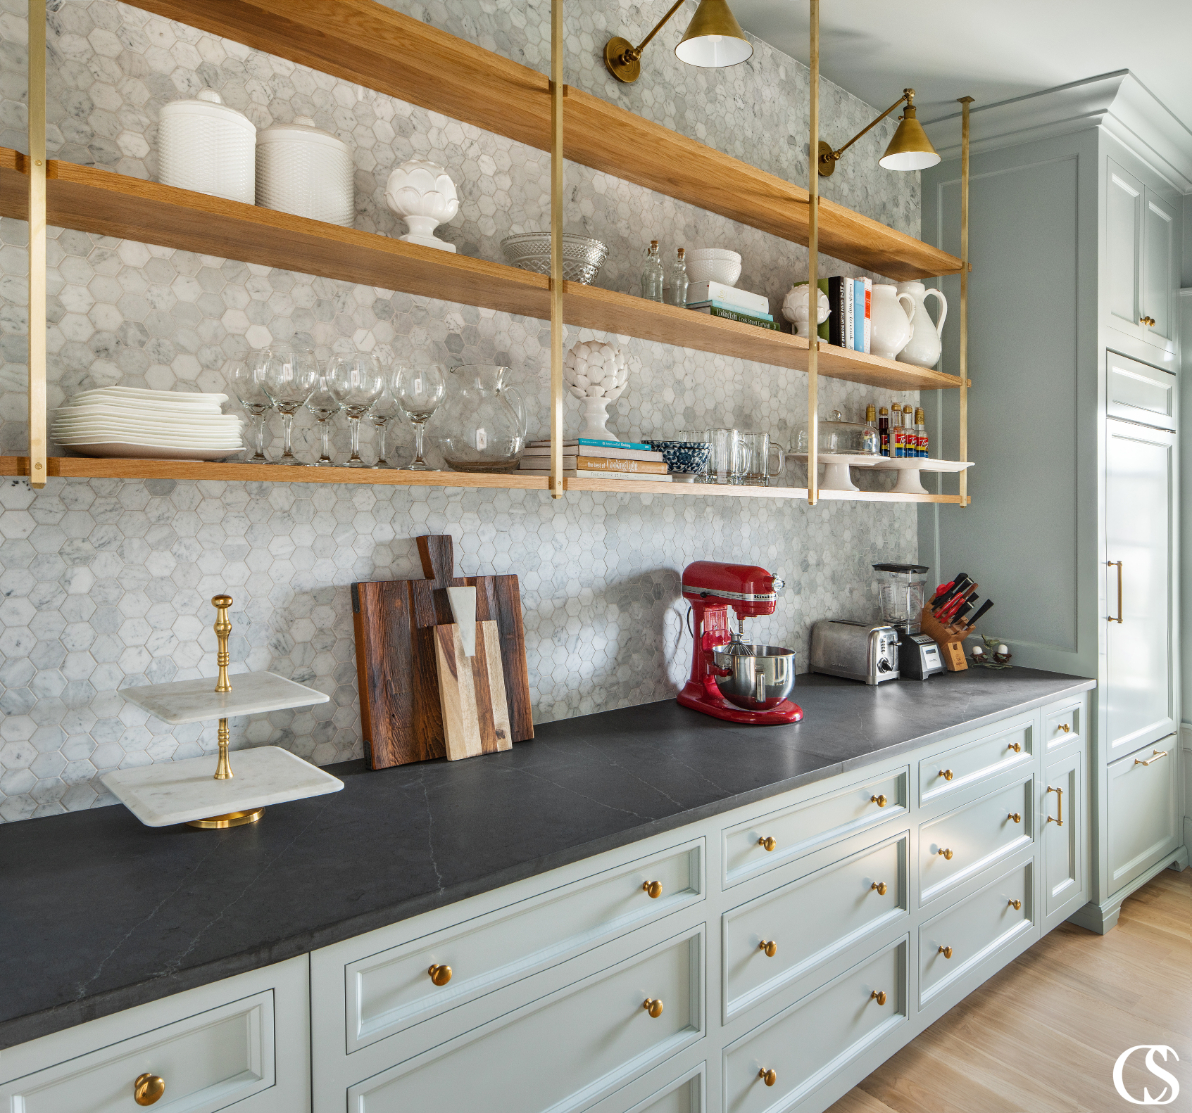 With so many kitchen trends coming and going, it can be hard to decide which trends to incorporate into your kitchen remodel and which ones to leave behind. The team at Christopher Scott Cabinetry can help you use trends in a way that feels timeless and contemporary.